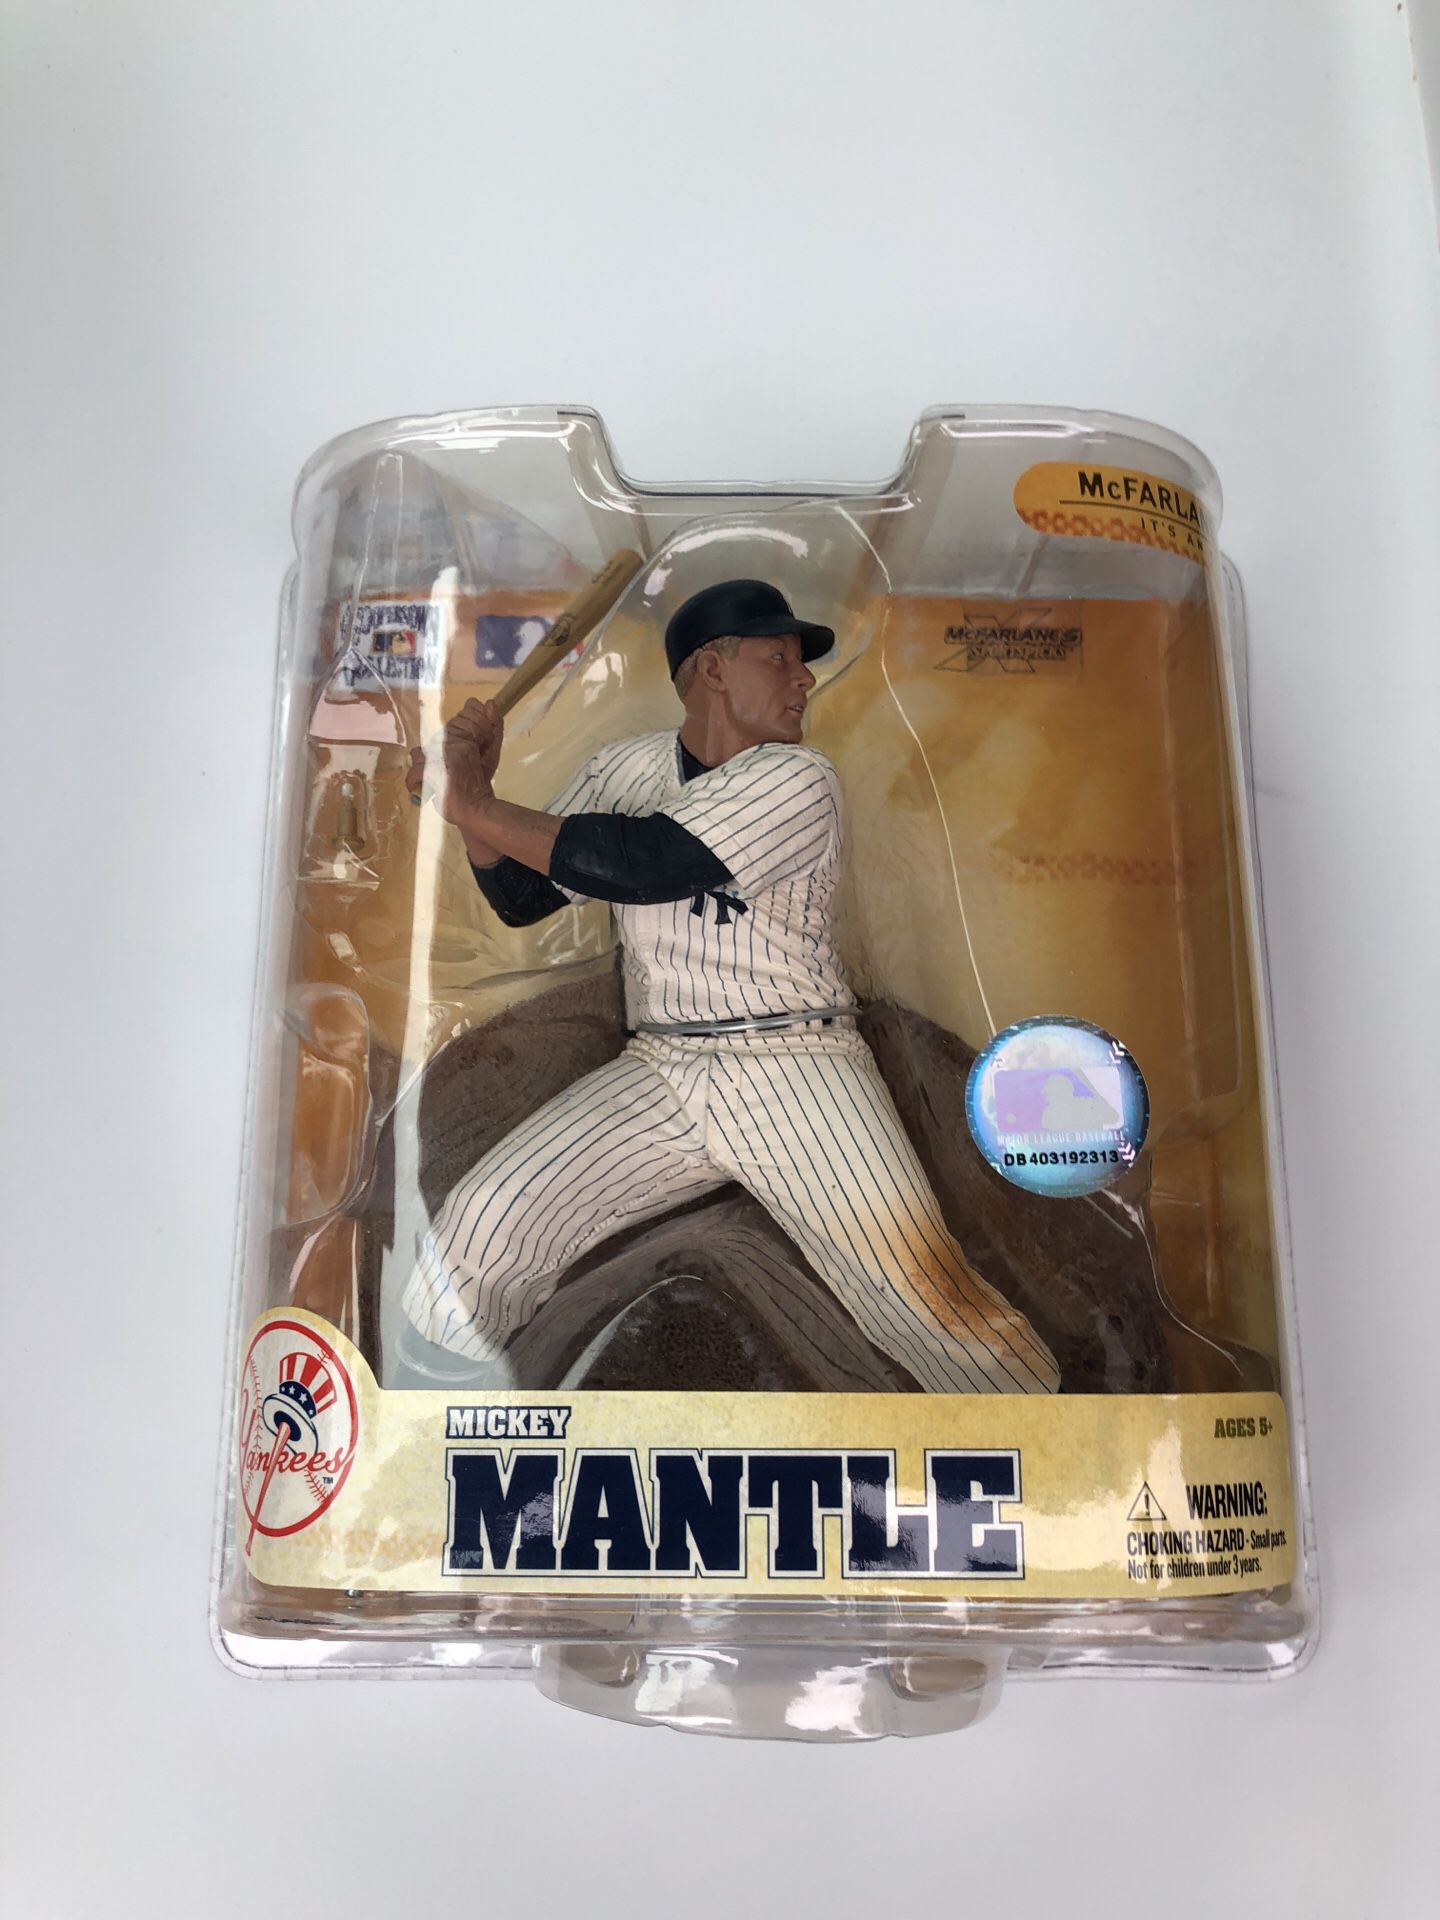 Mickey Mantle NY Yankee HOF Cooperstown Collection McFarlane Figurine